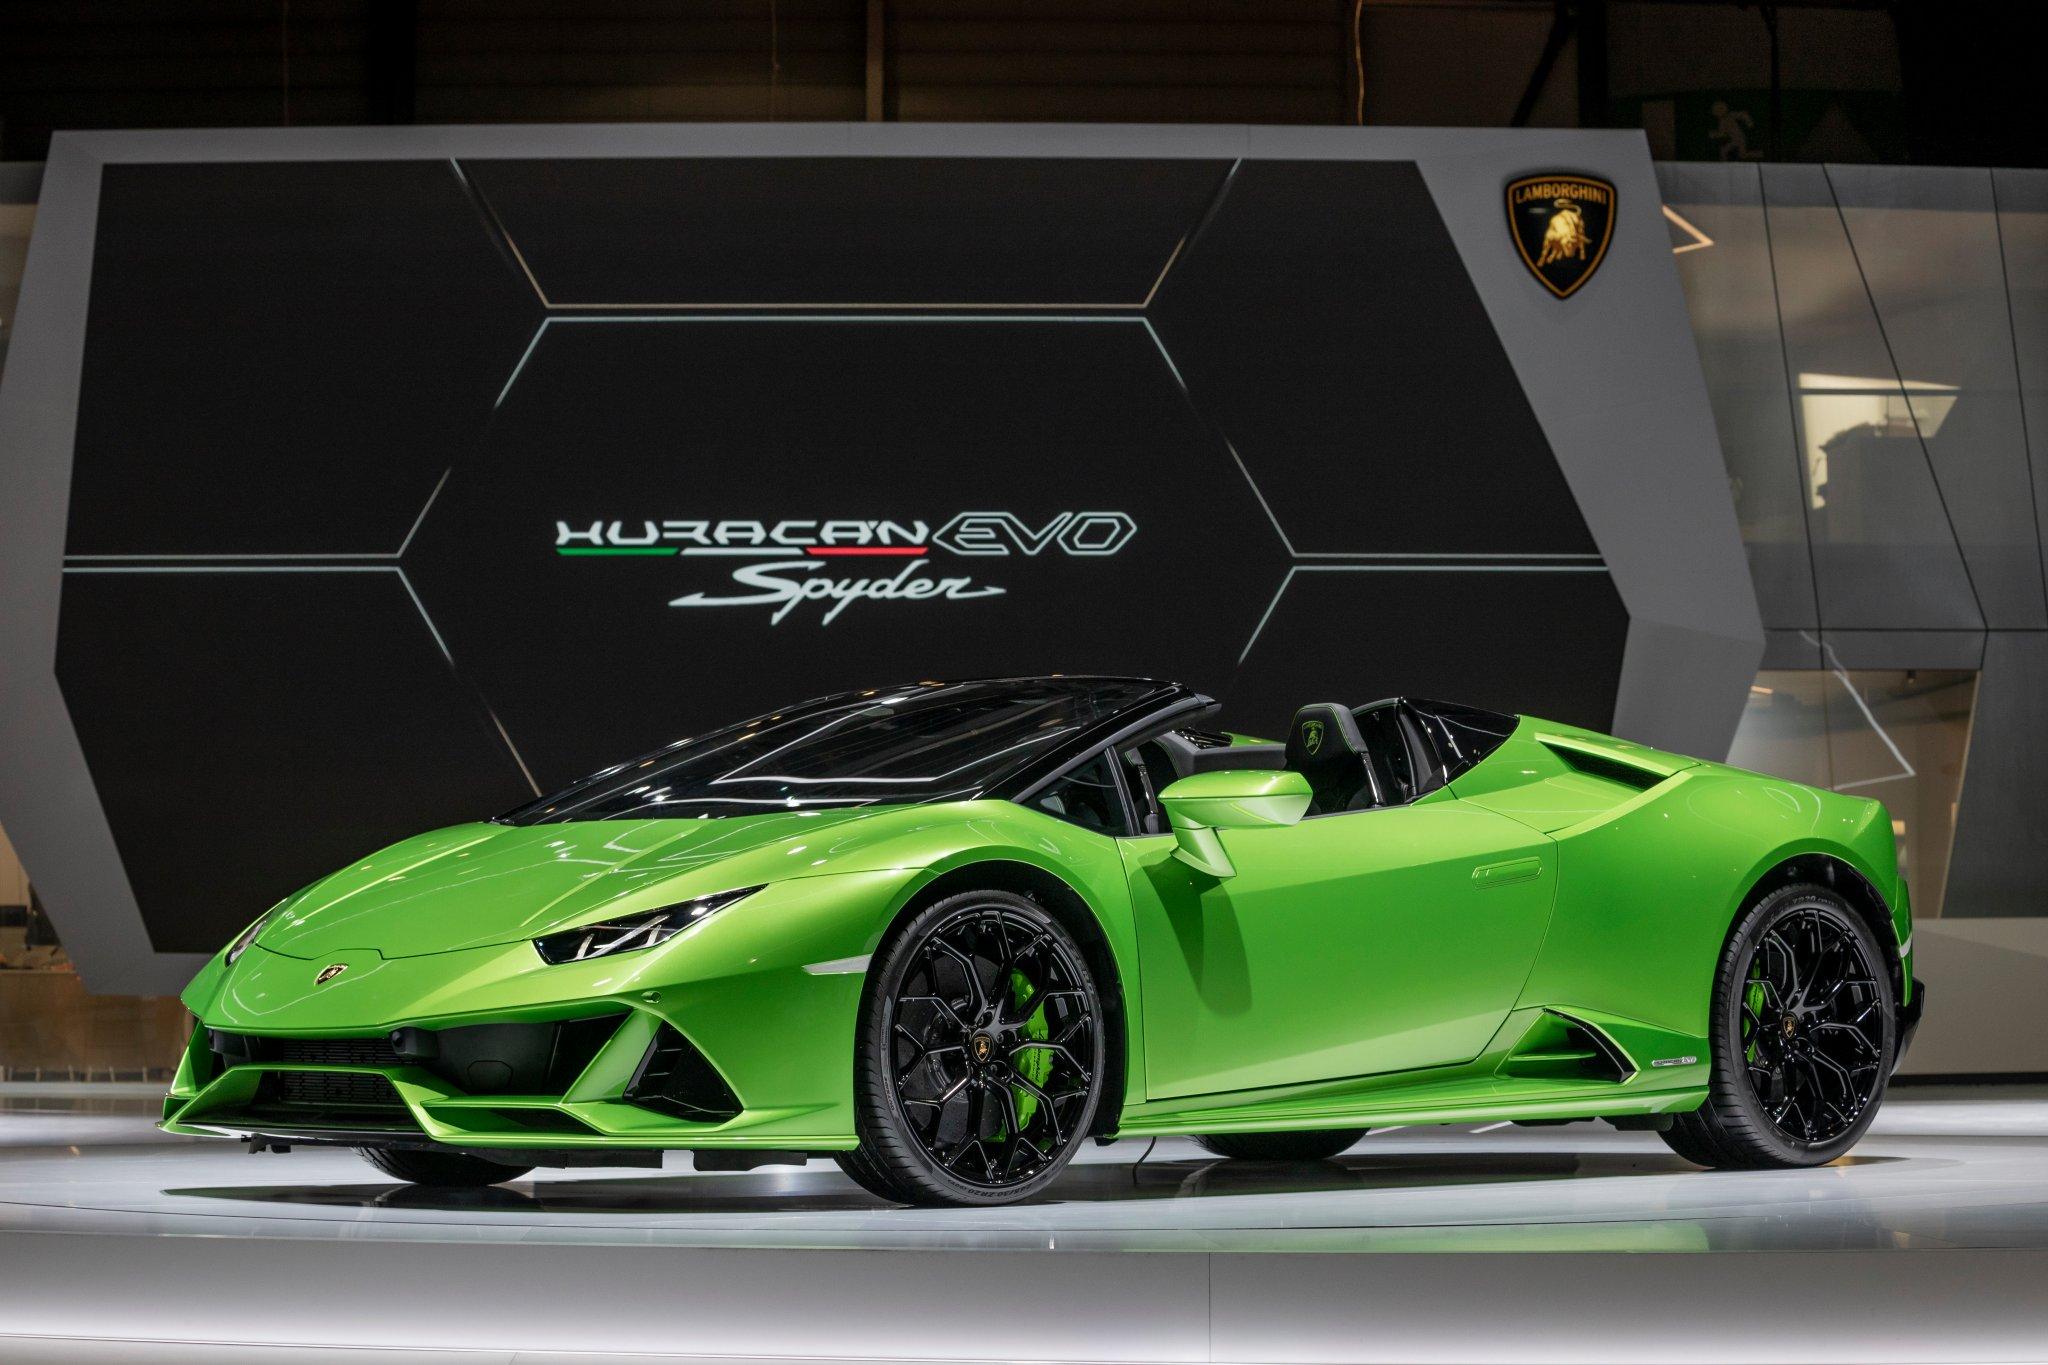 One of the six huracan variants